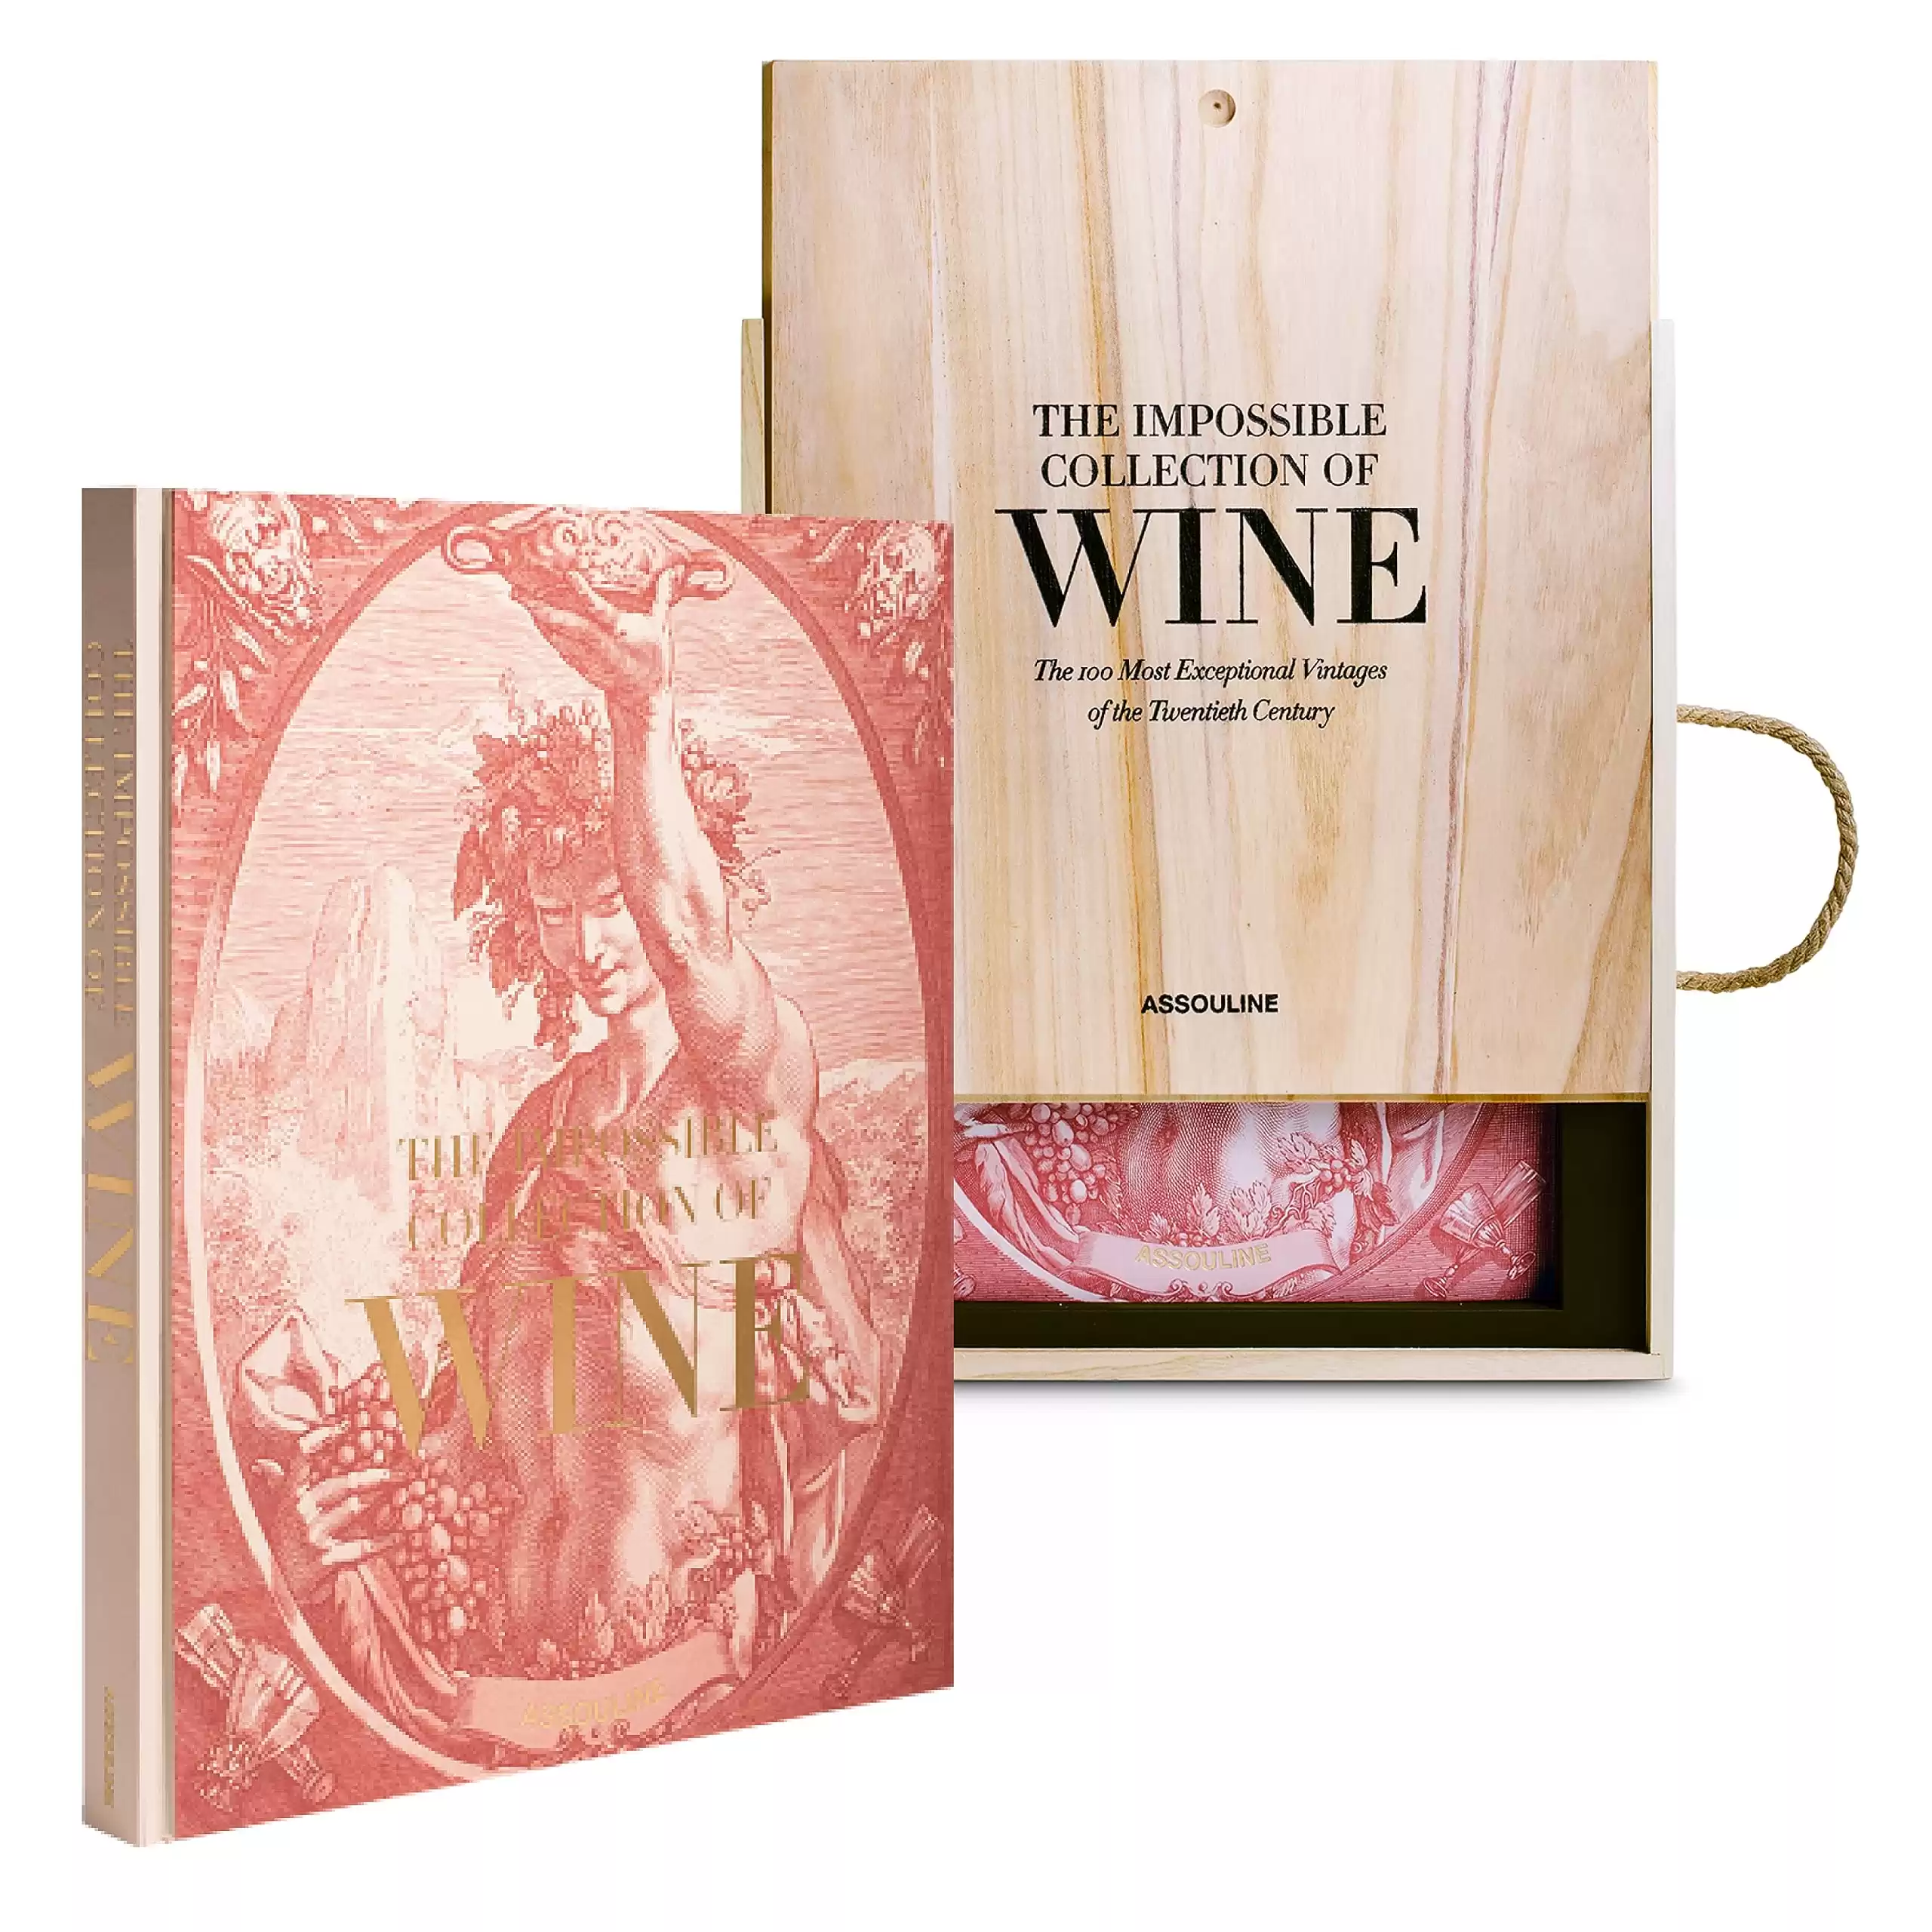 The Impossible Collection of Wine by Enrico Bernardo